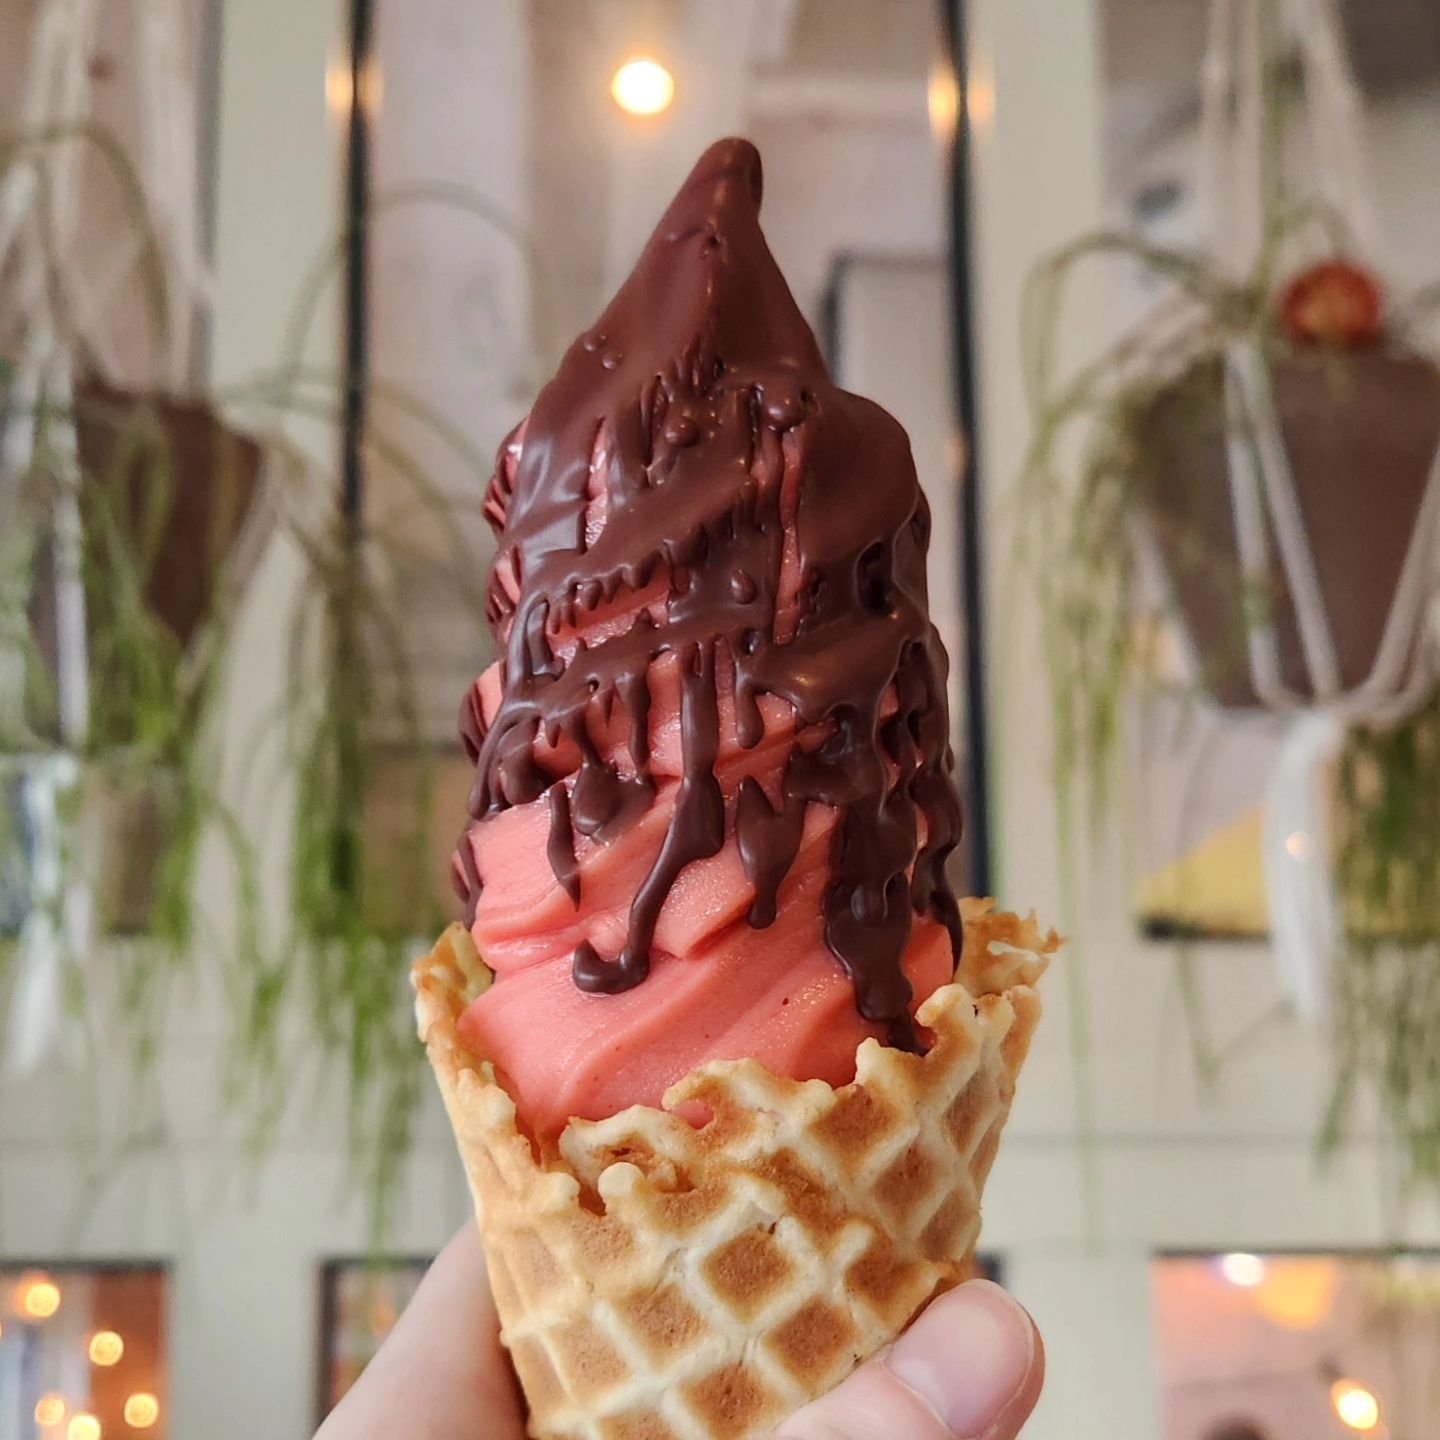 It's grey outside, but cozy in our caf&eacute;! Come treat yourself to something nice, like a chocolate covered strawberry sorbet! 🍓 🍫